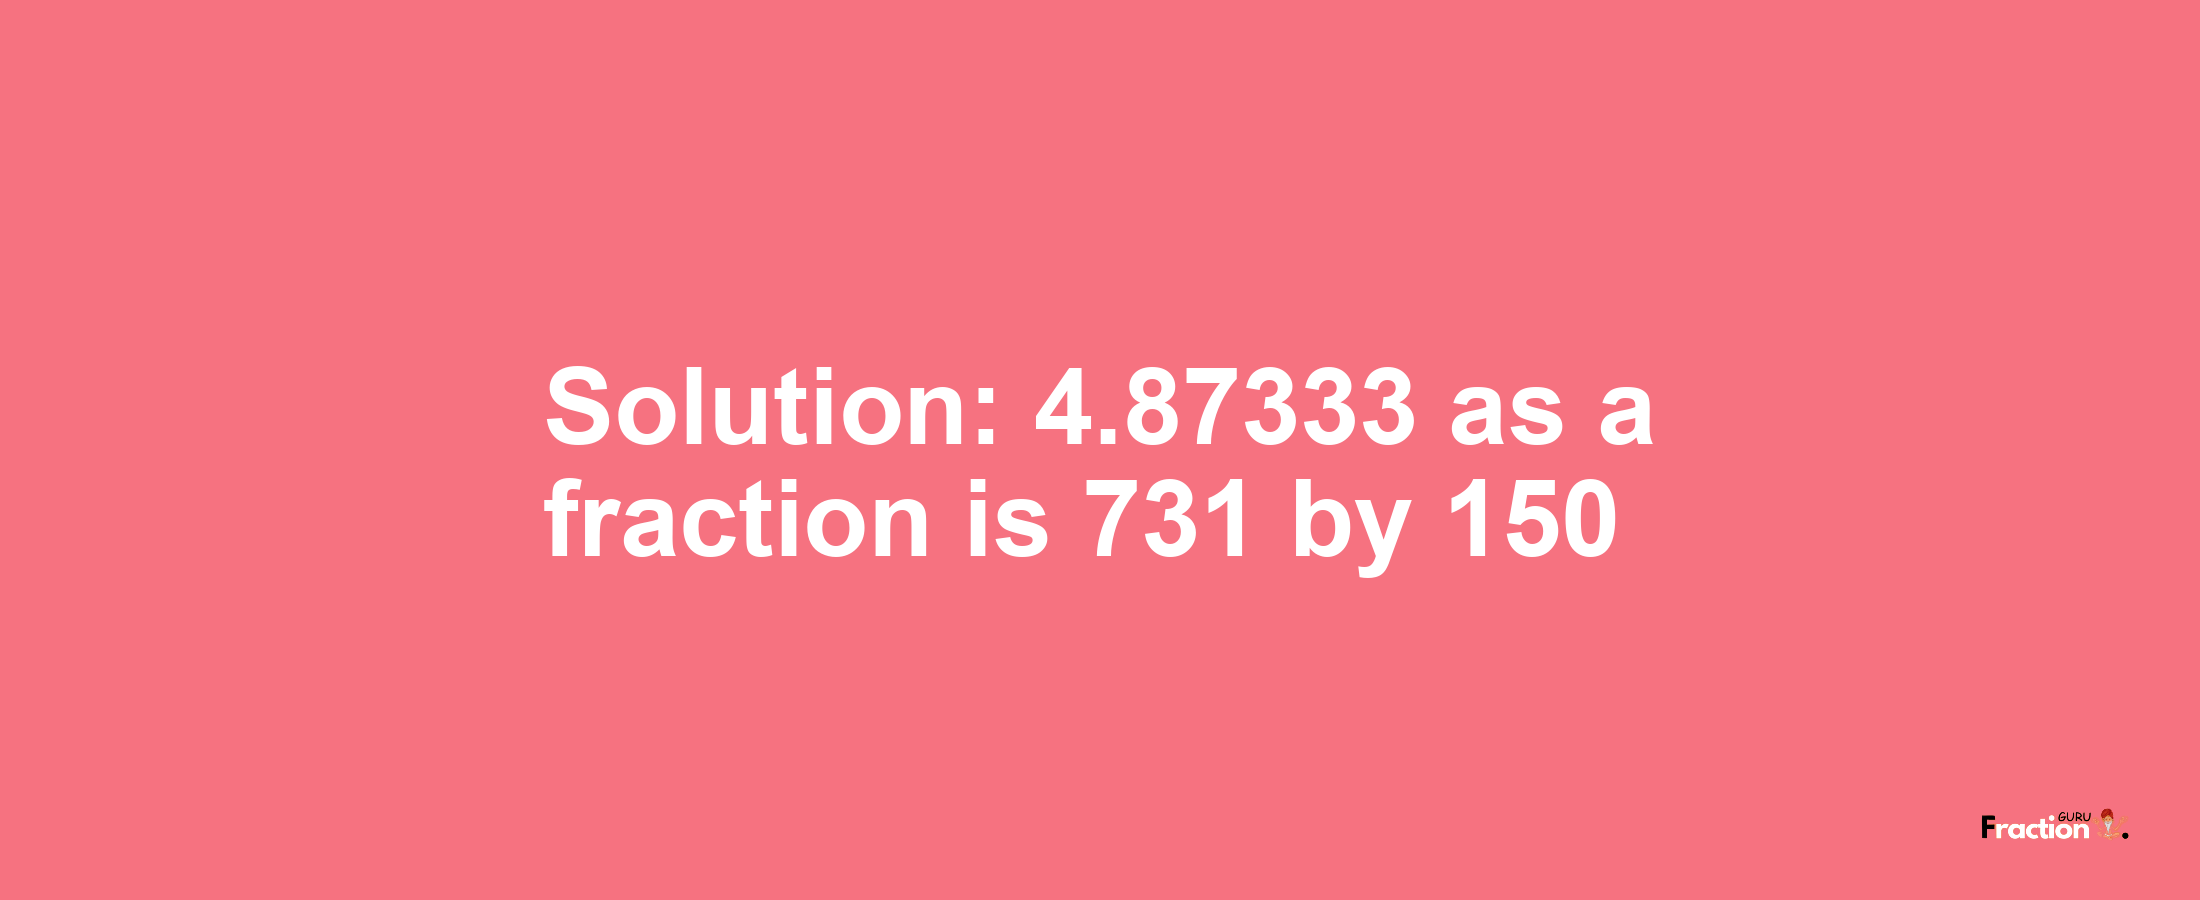 Solution:4.87333 as a fraction is 731/150